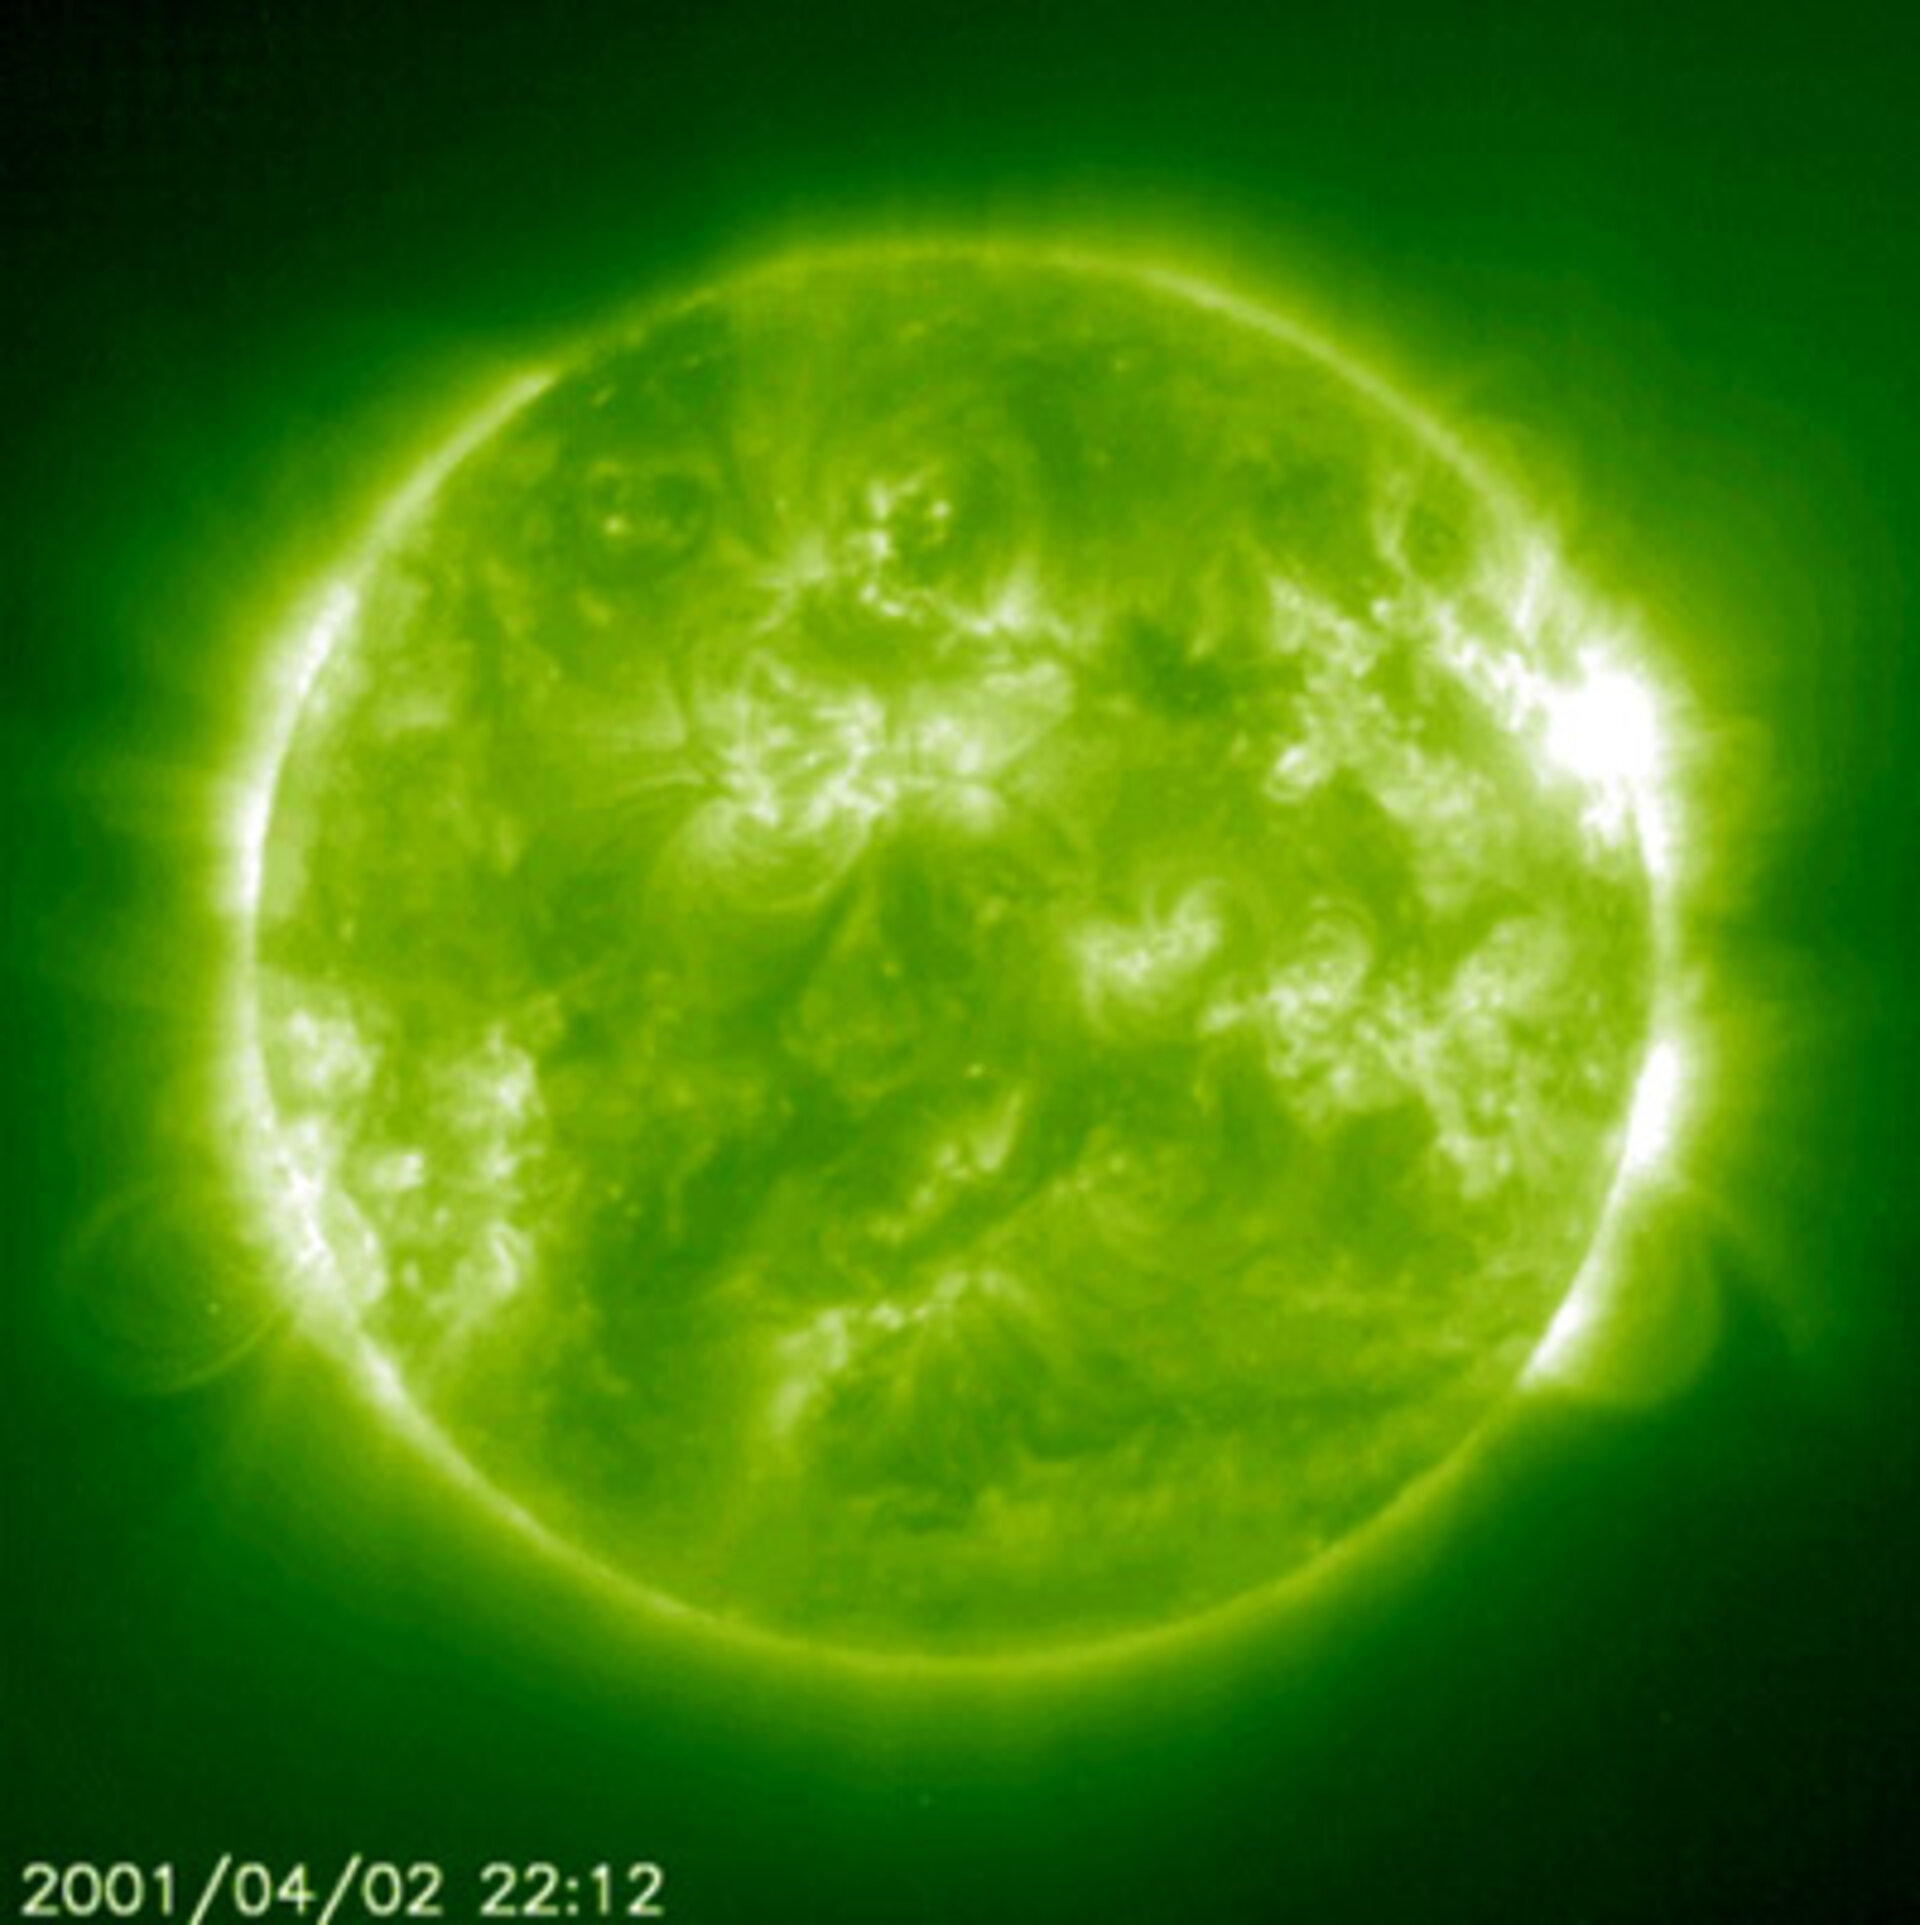 The solar flare of 2 April 2001 observed by the EIT on SOHO